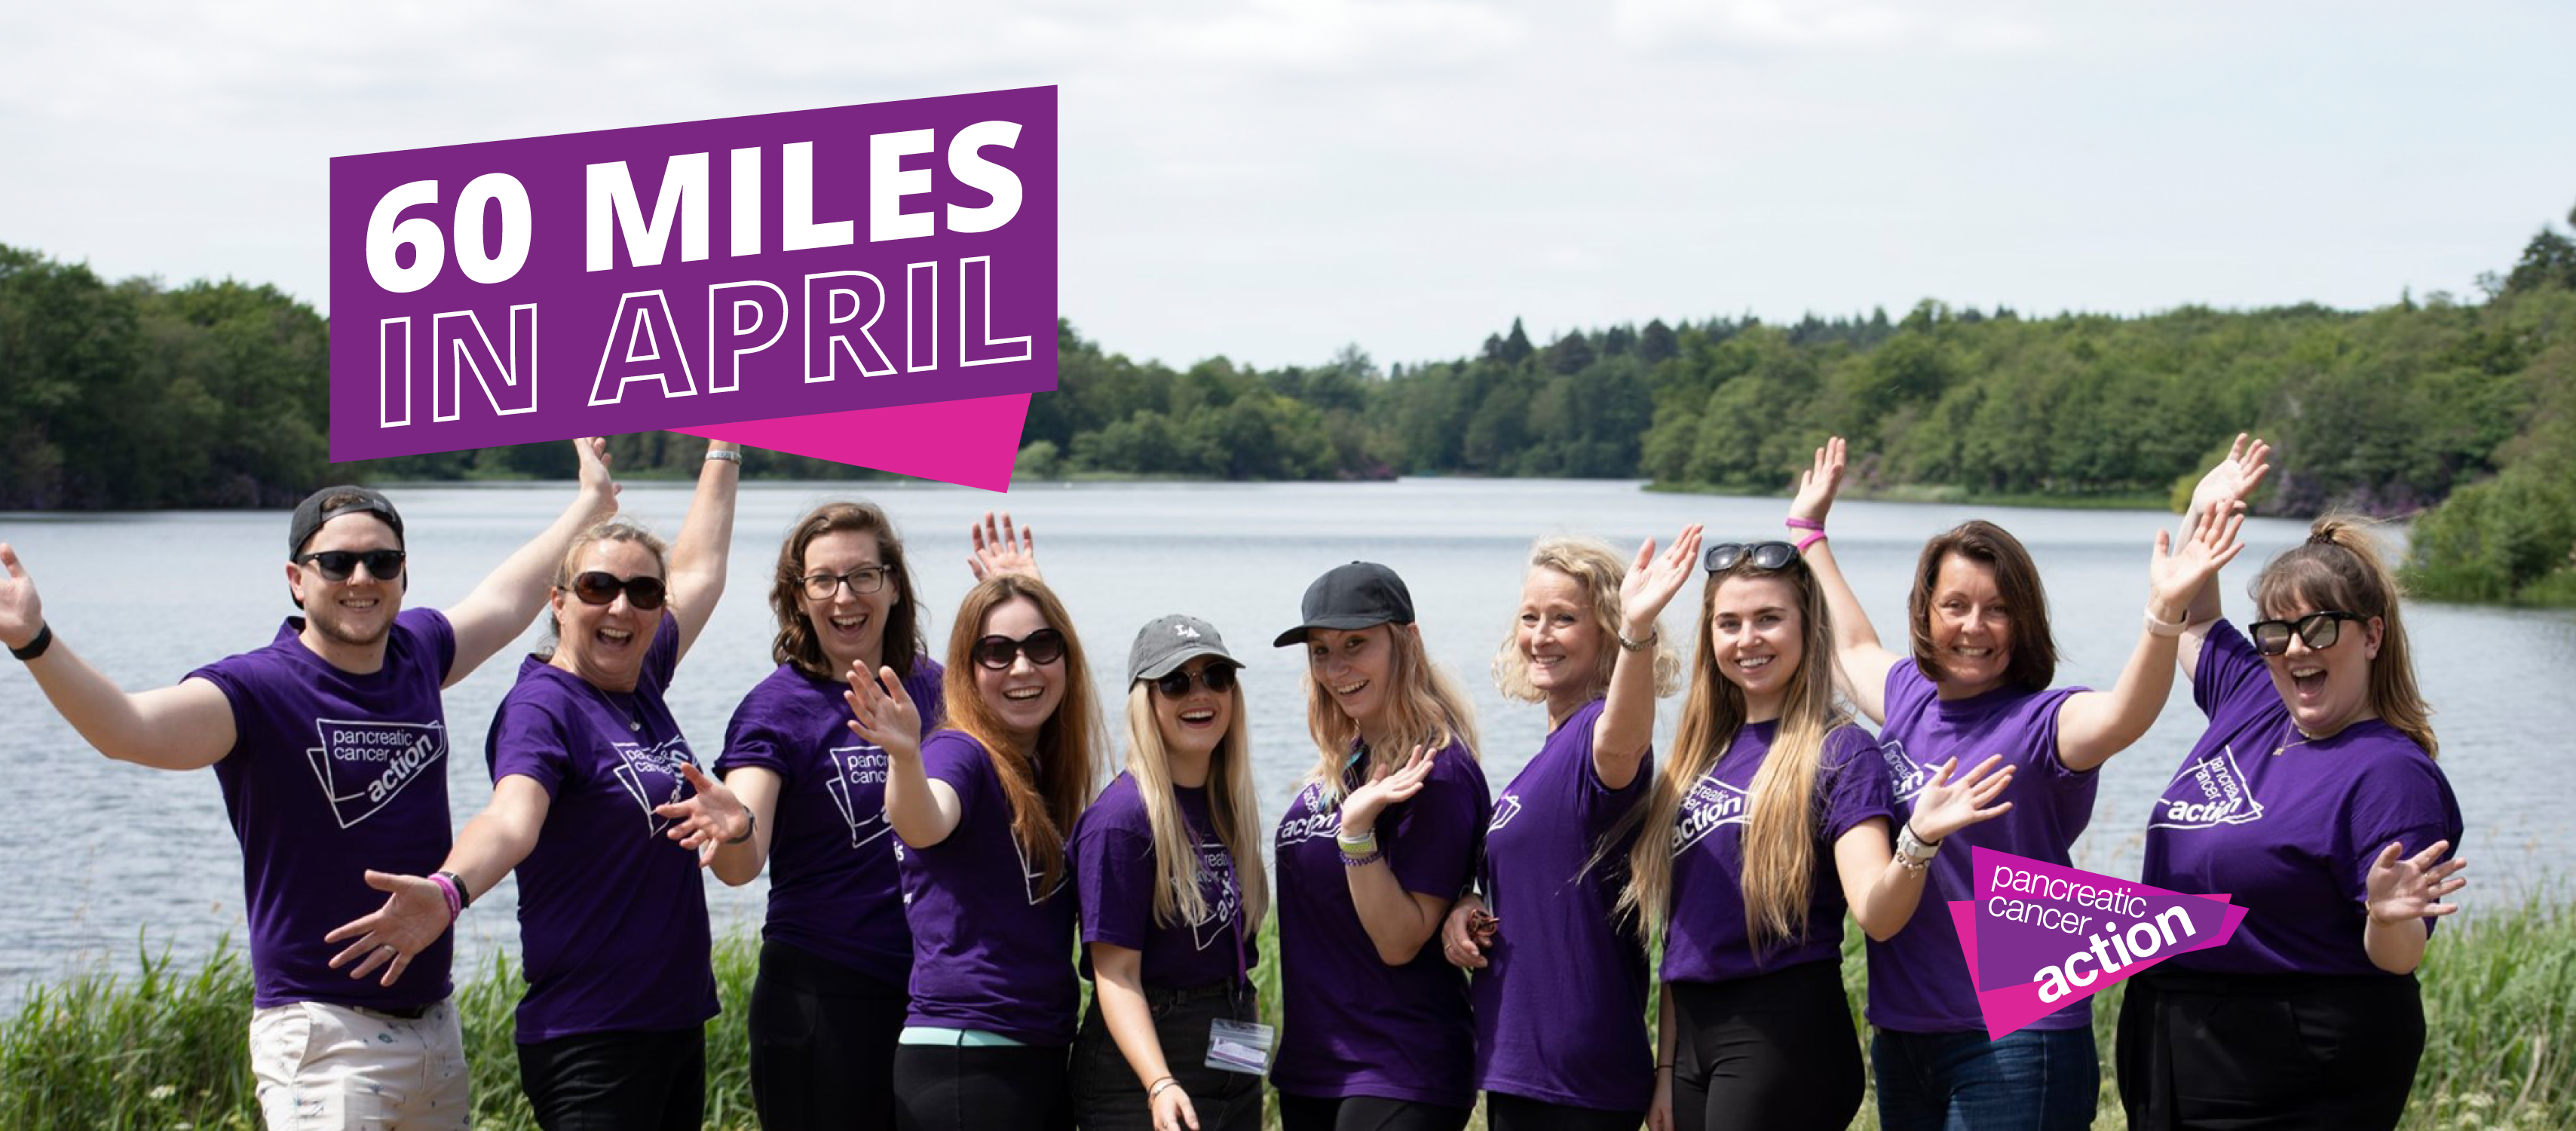 60 Miles in April - fundraise for pancreatic cancer action